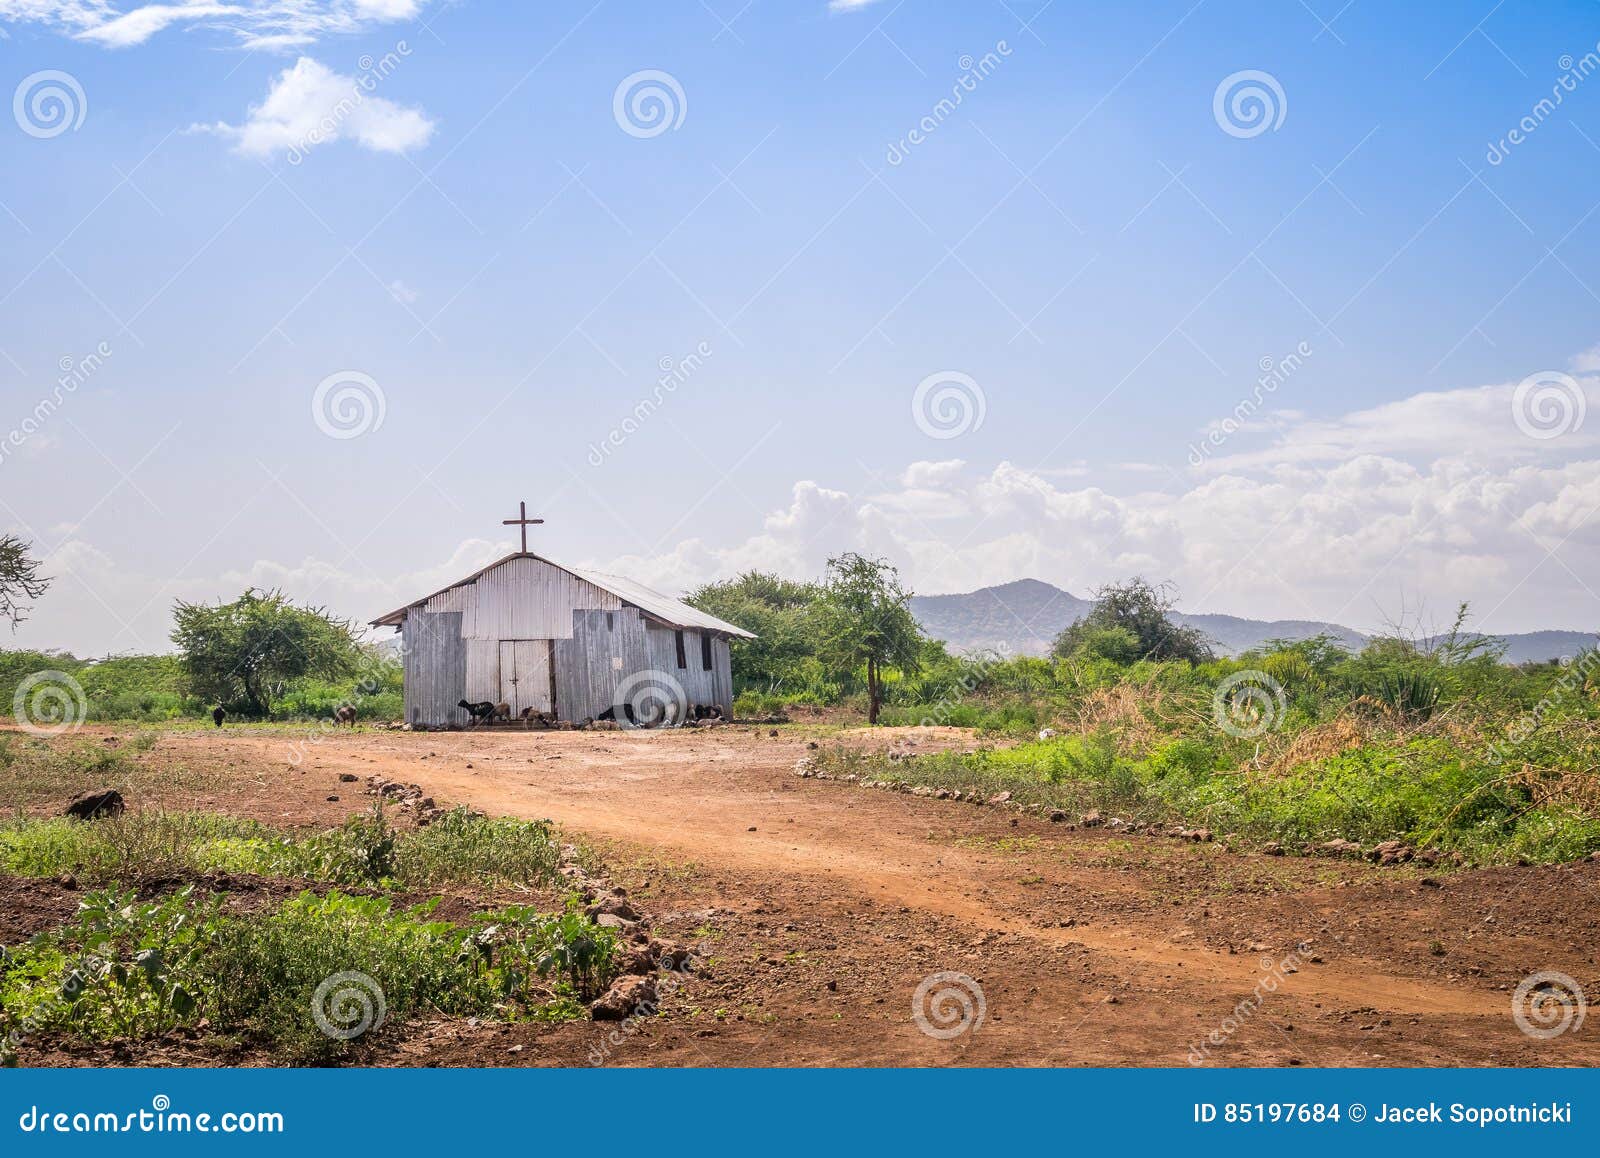 small christian church in rural african area